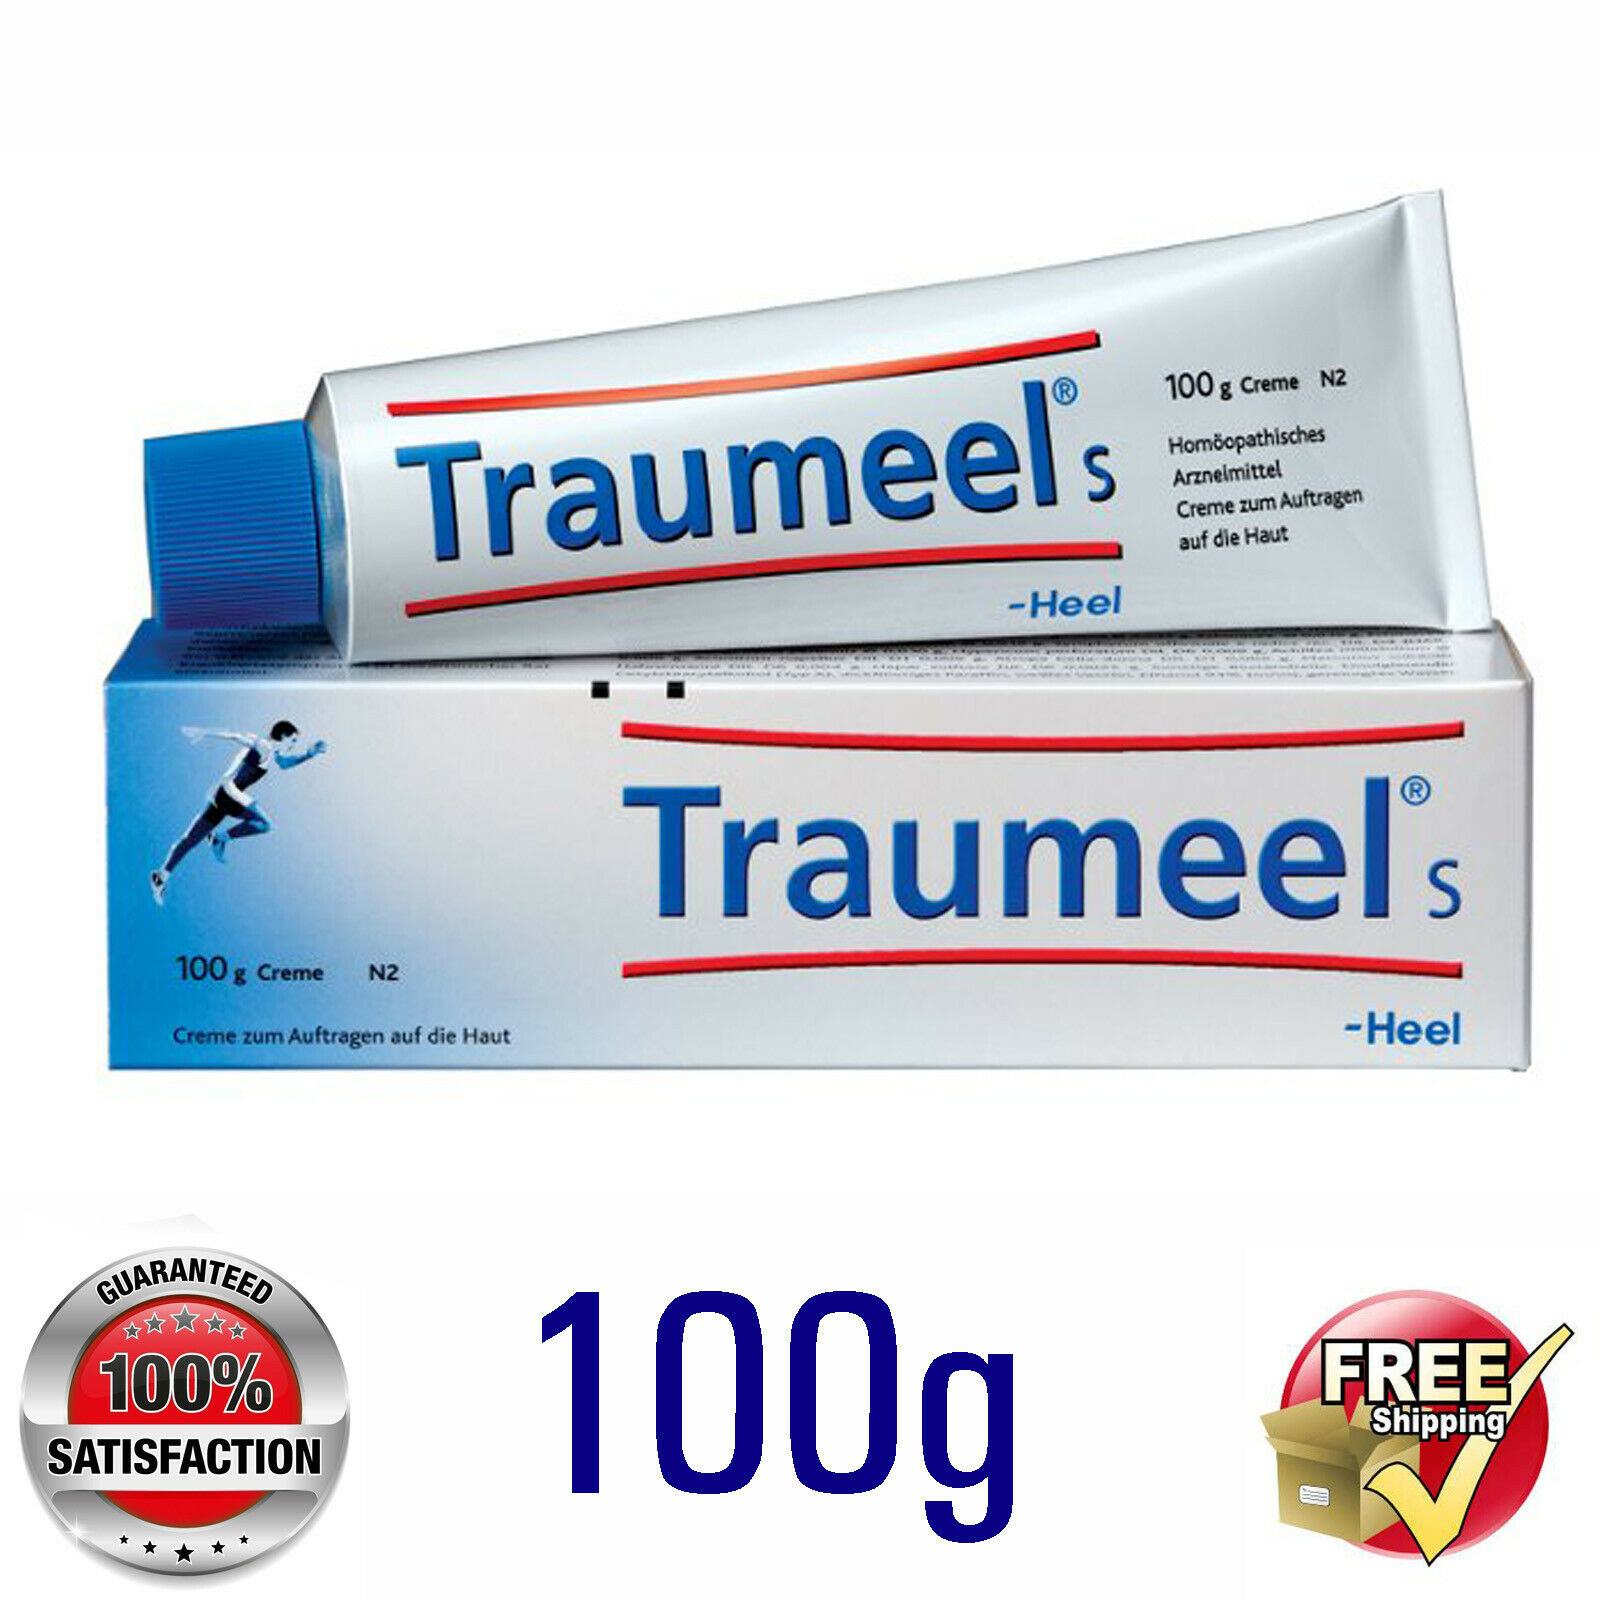 Traumeel®s @ Homeopathic Anti Inflamatory Pain Relief Ointment @  100g/3.52oz